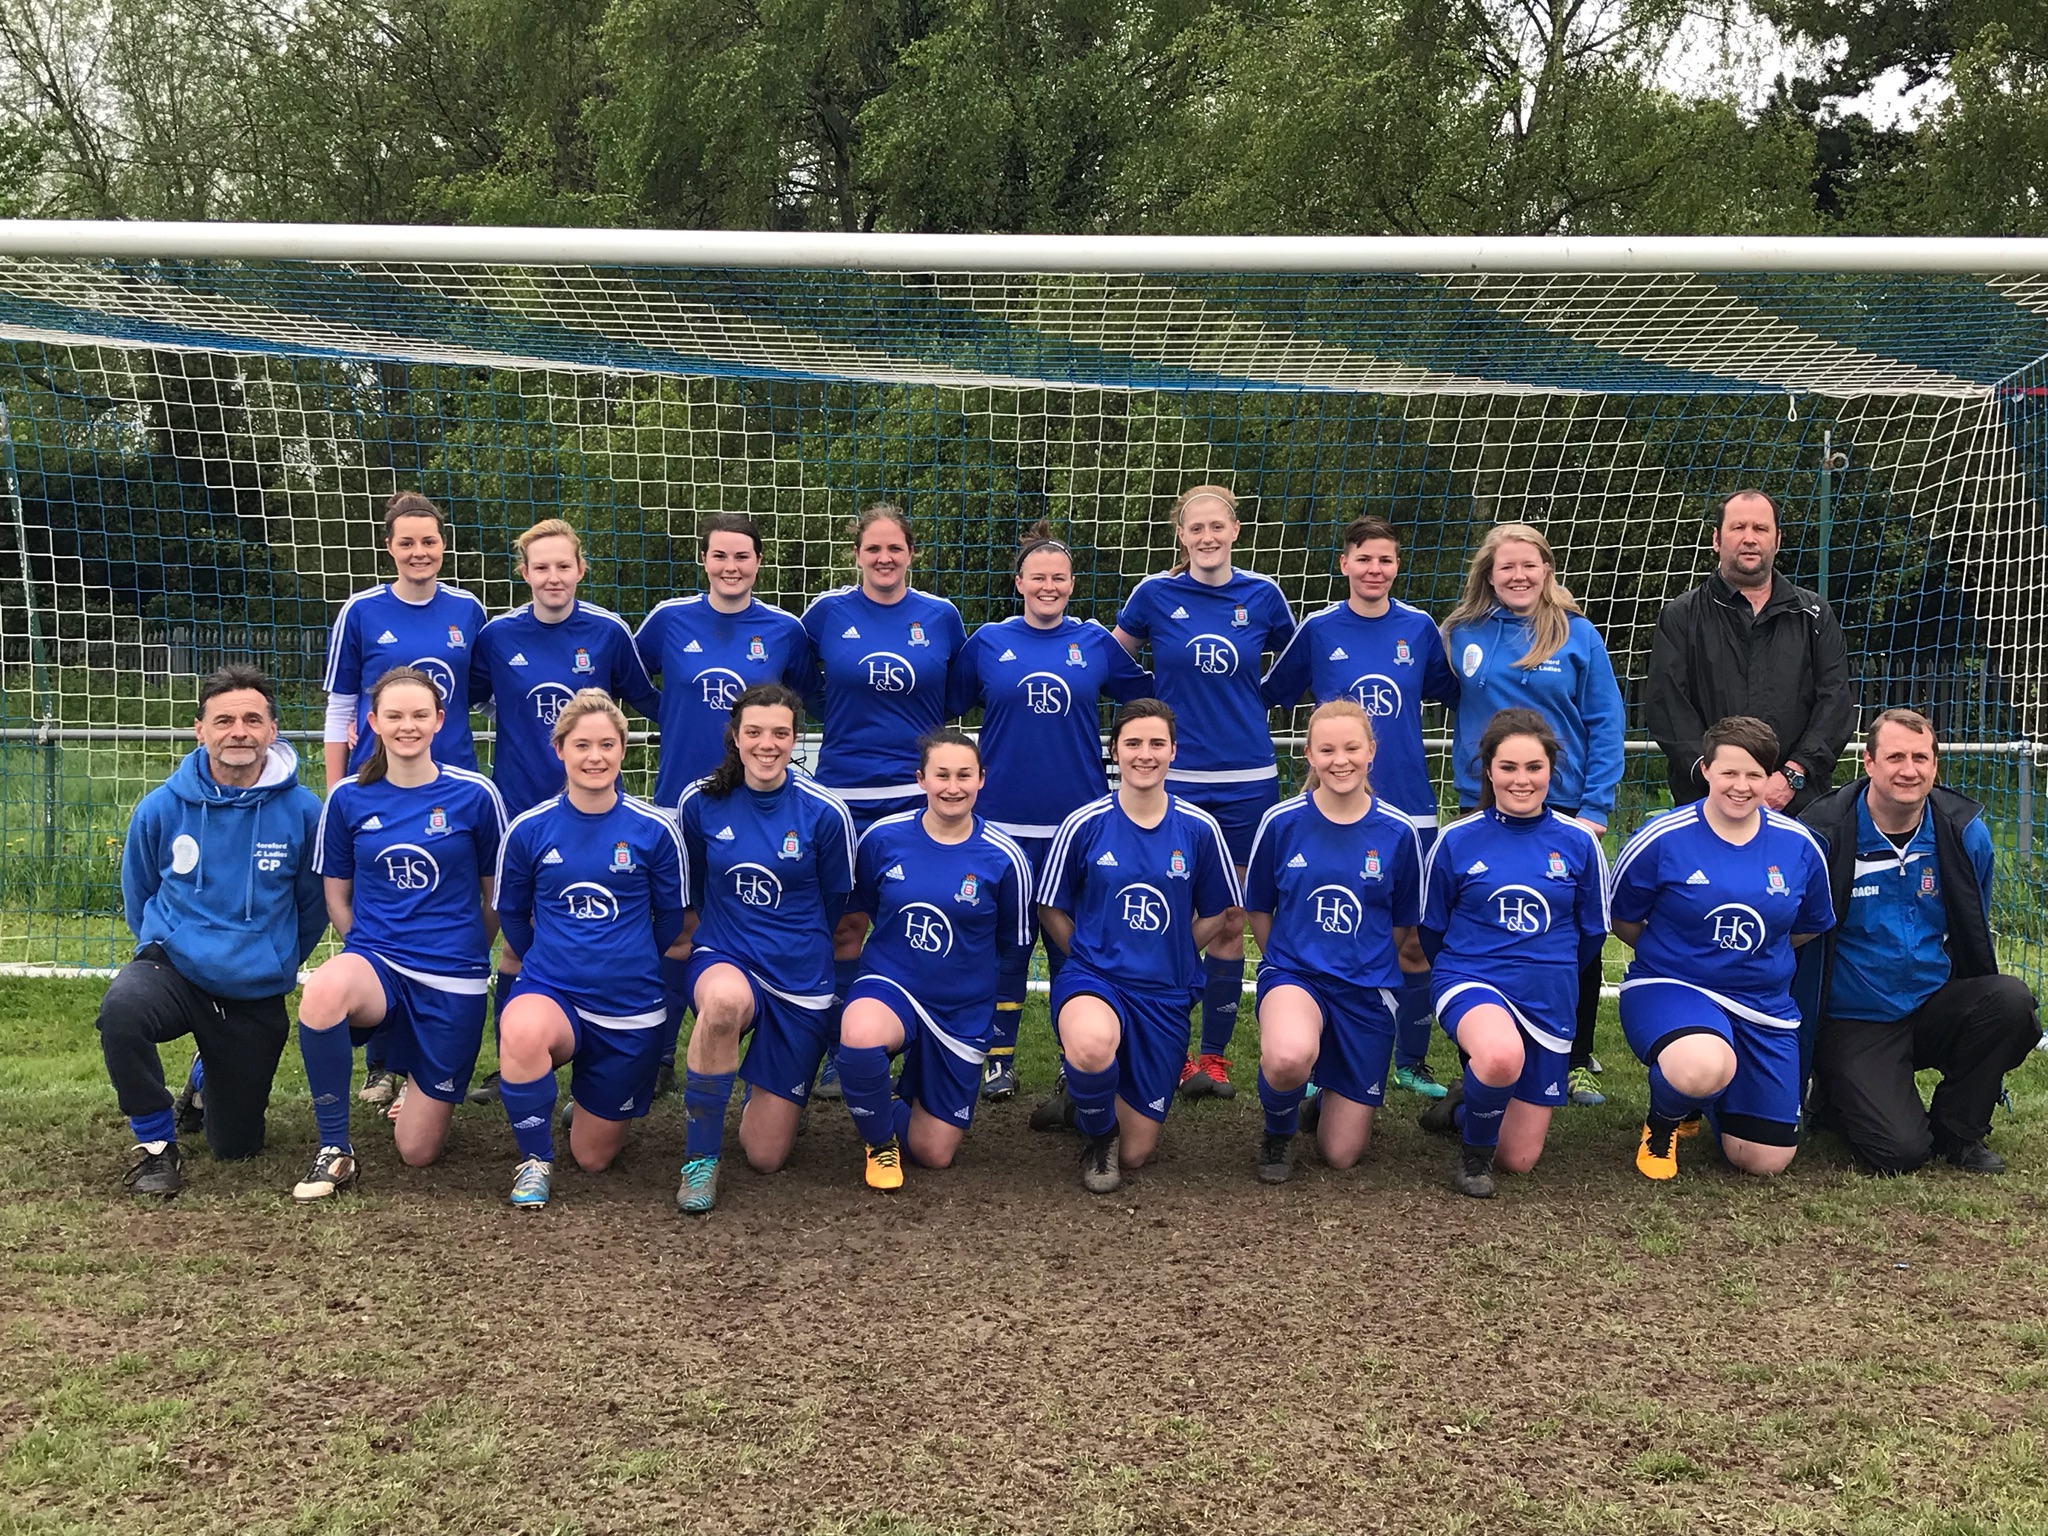 Match Report: 29/04/18  Hereford LC Ladies v Wyre Forest Ladies